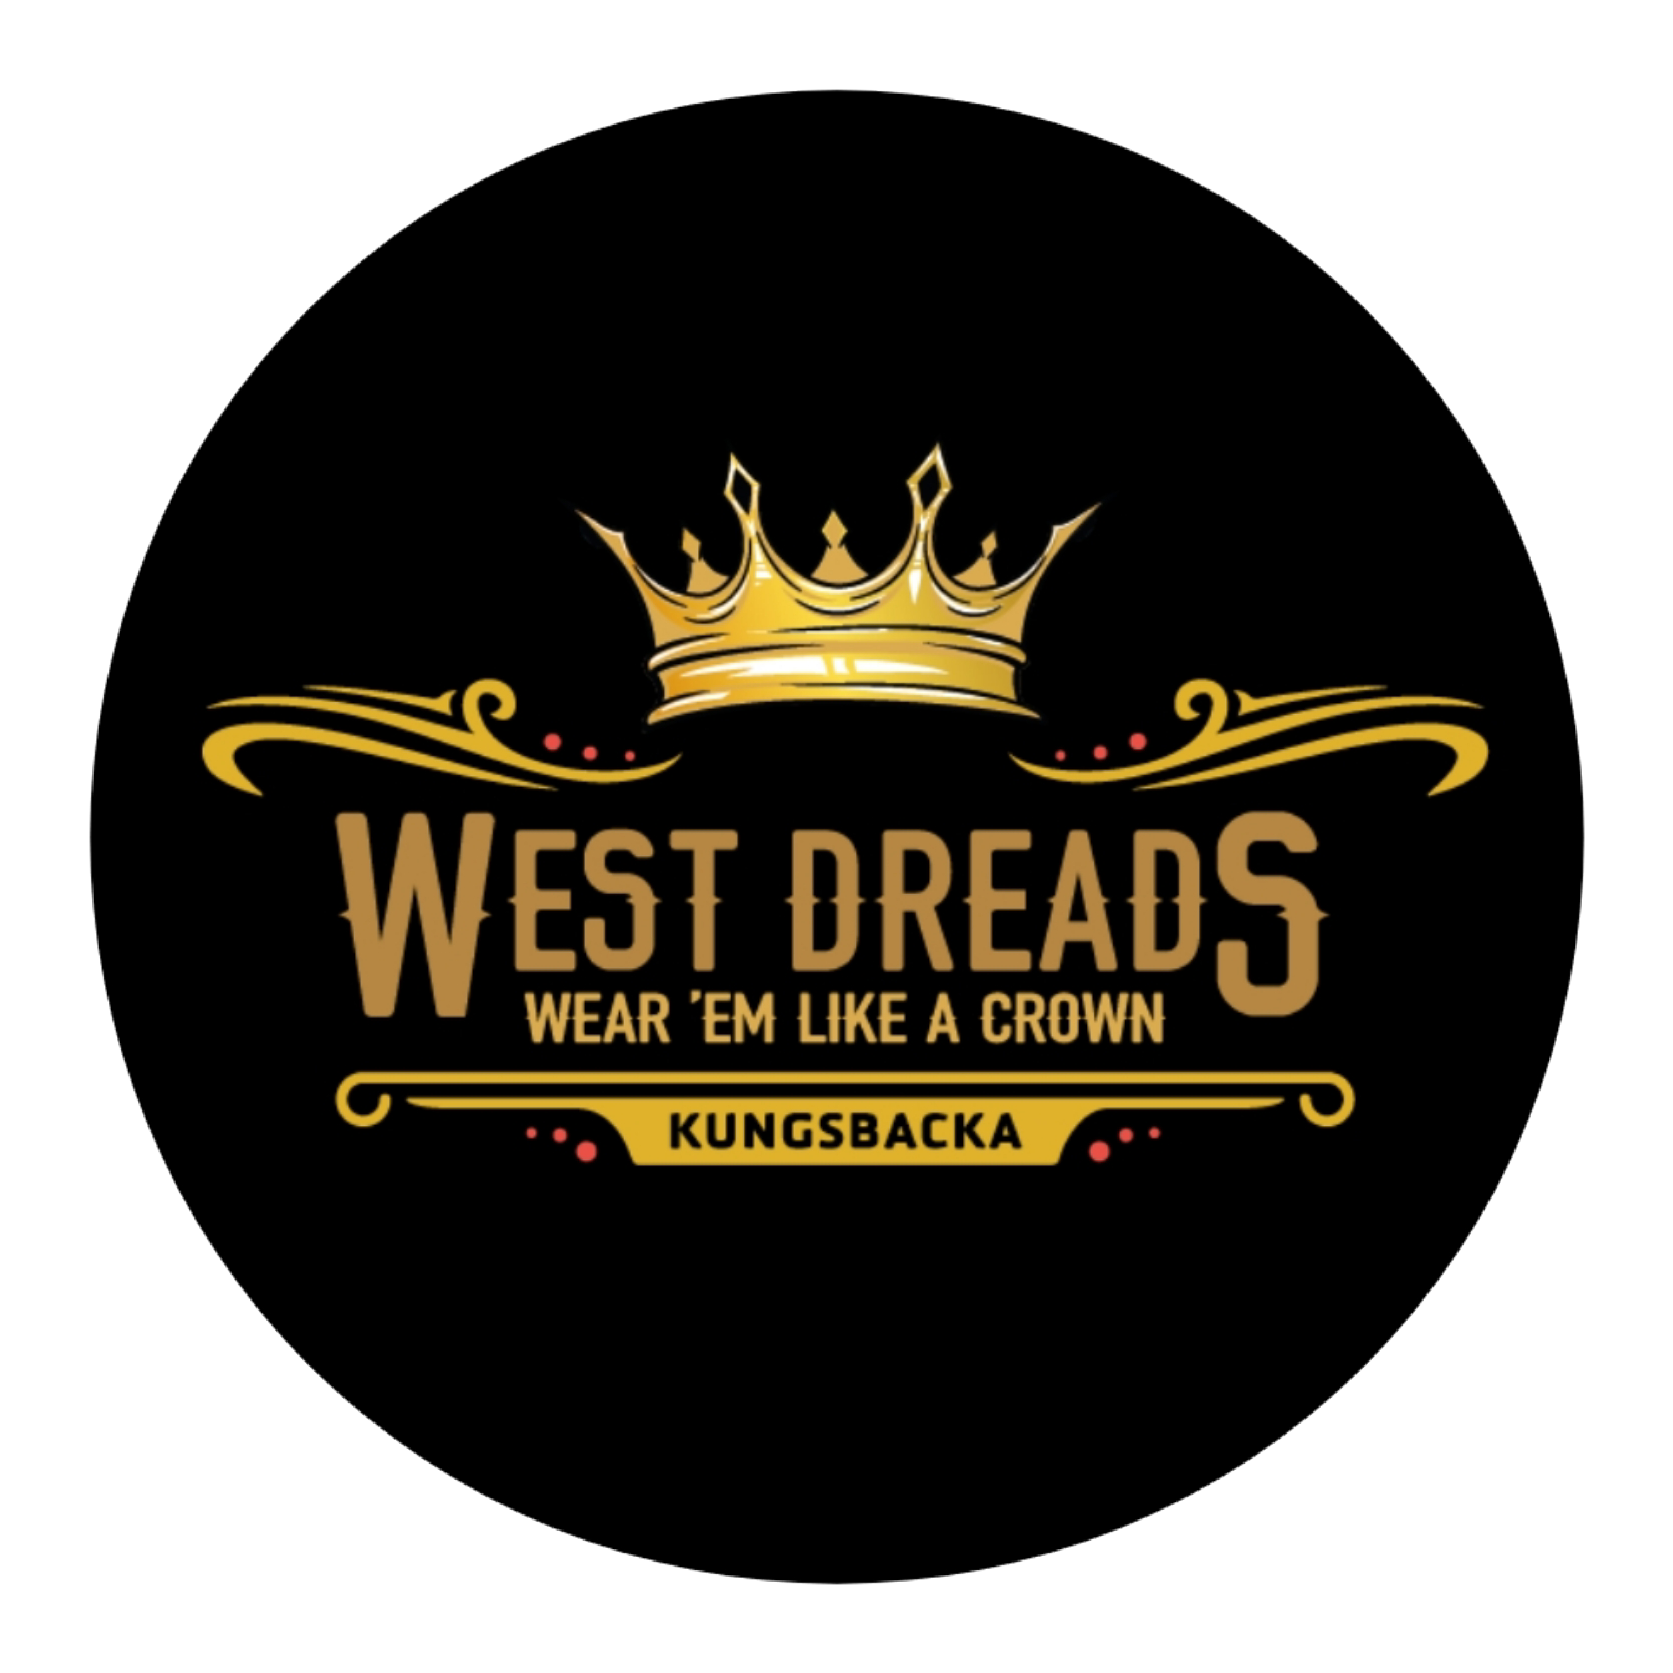 West Dreads